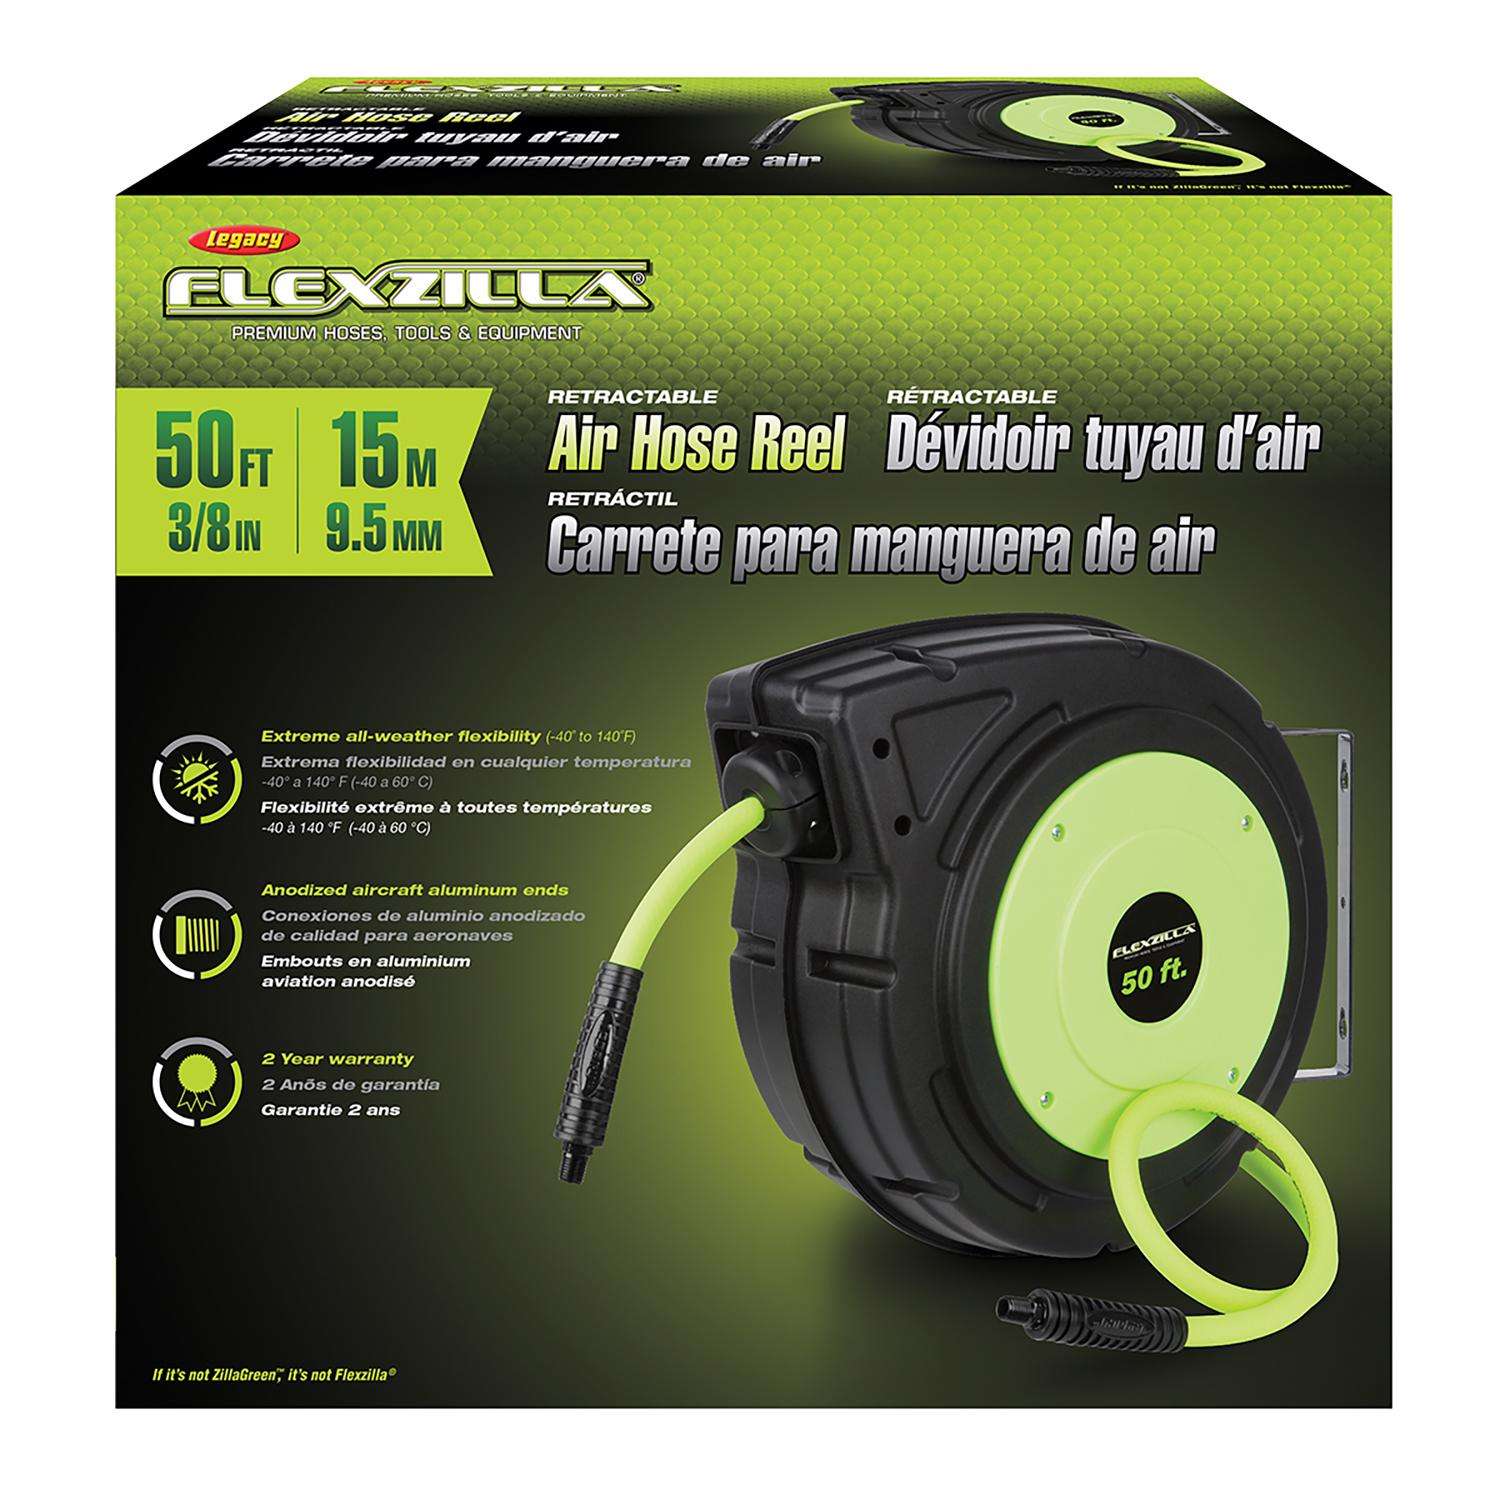 Best Deal in Canada  Craftsman Auto. Tracking Hose Reel For Up To